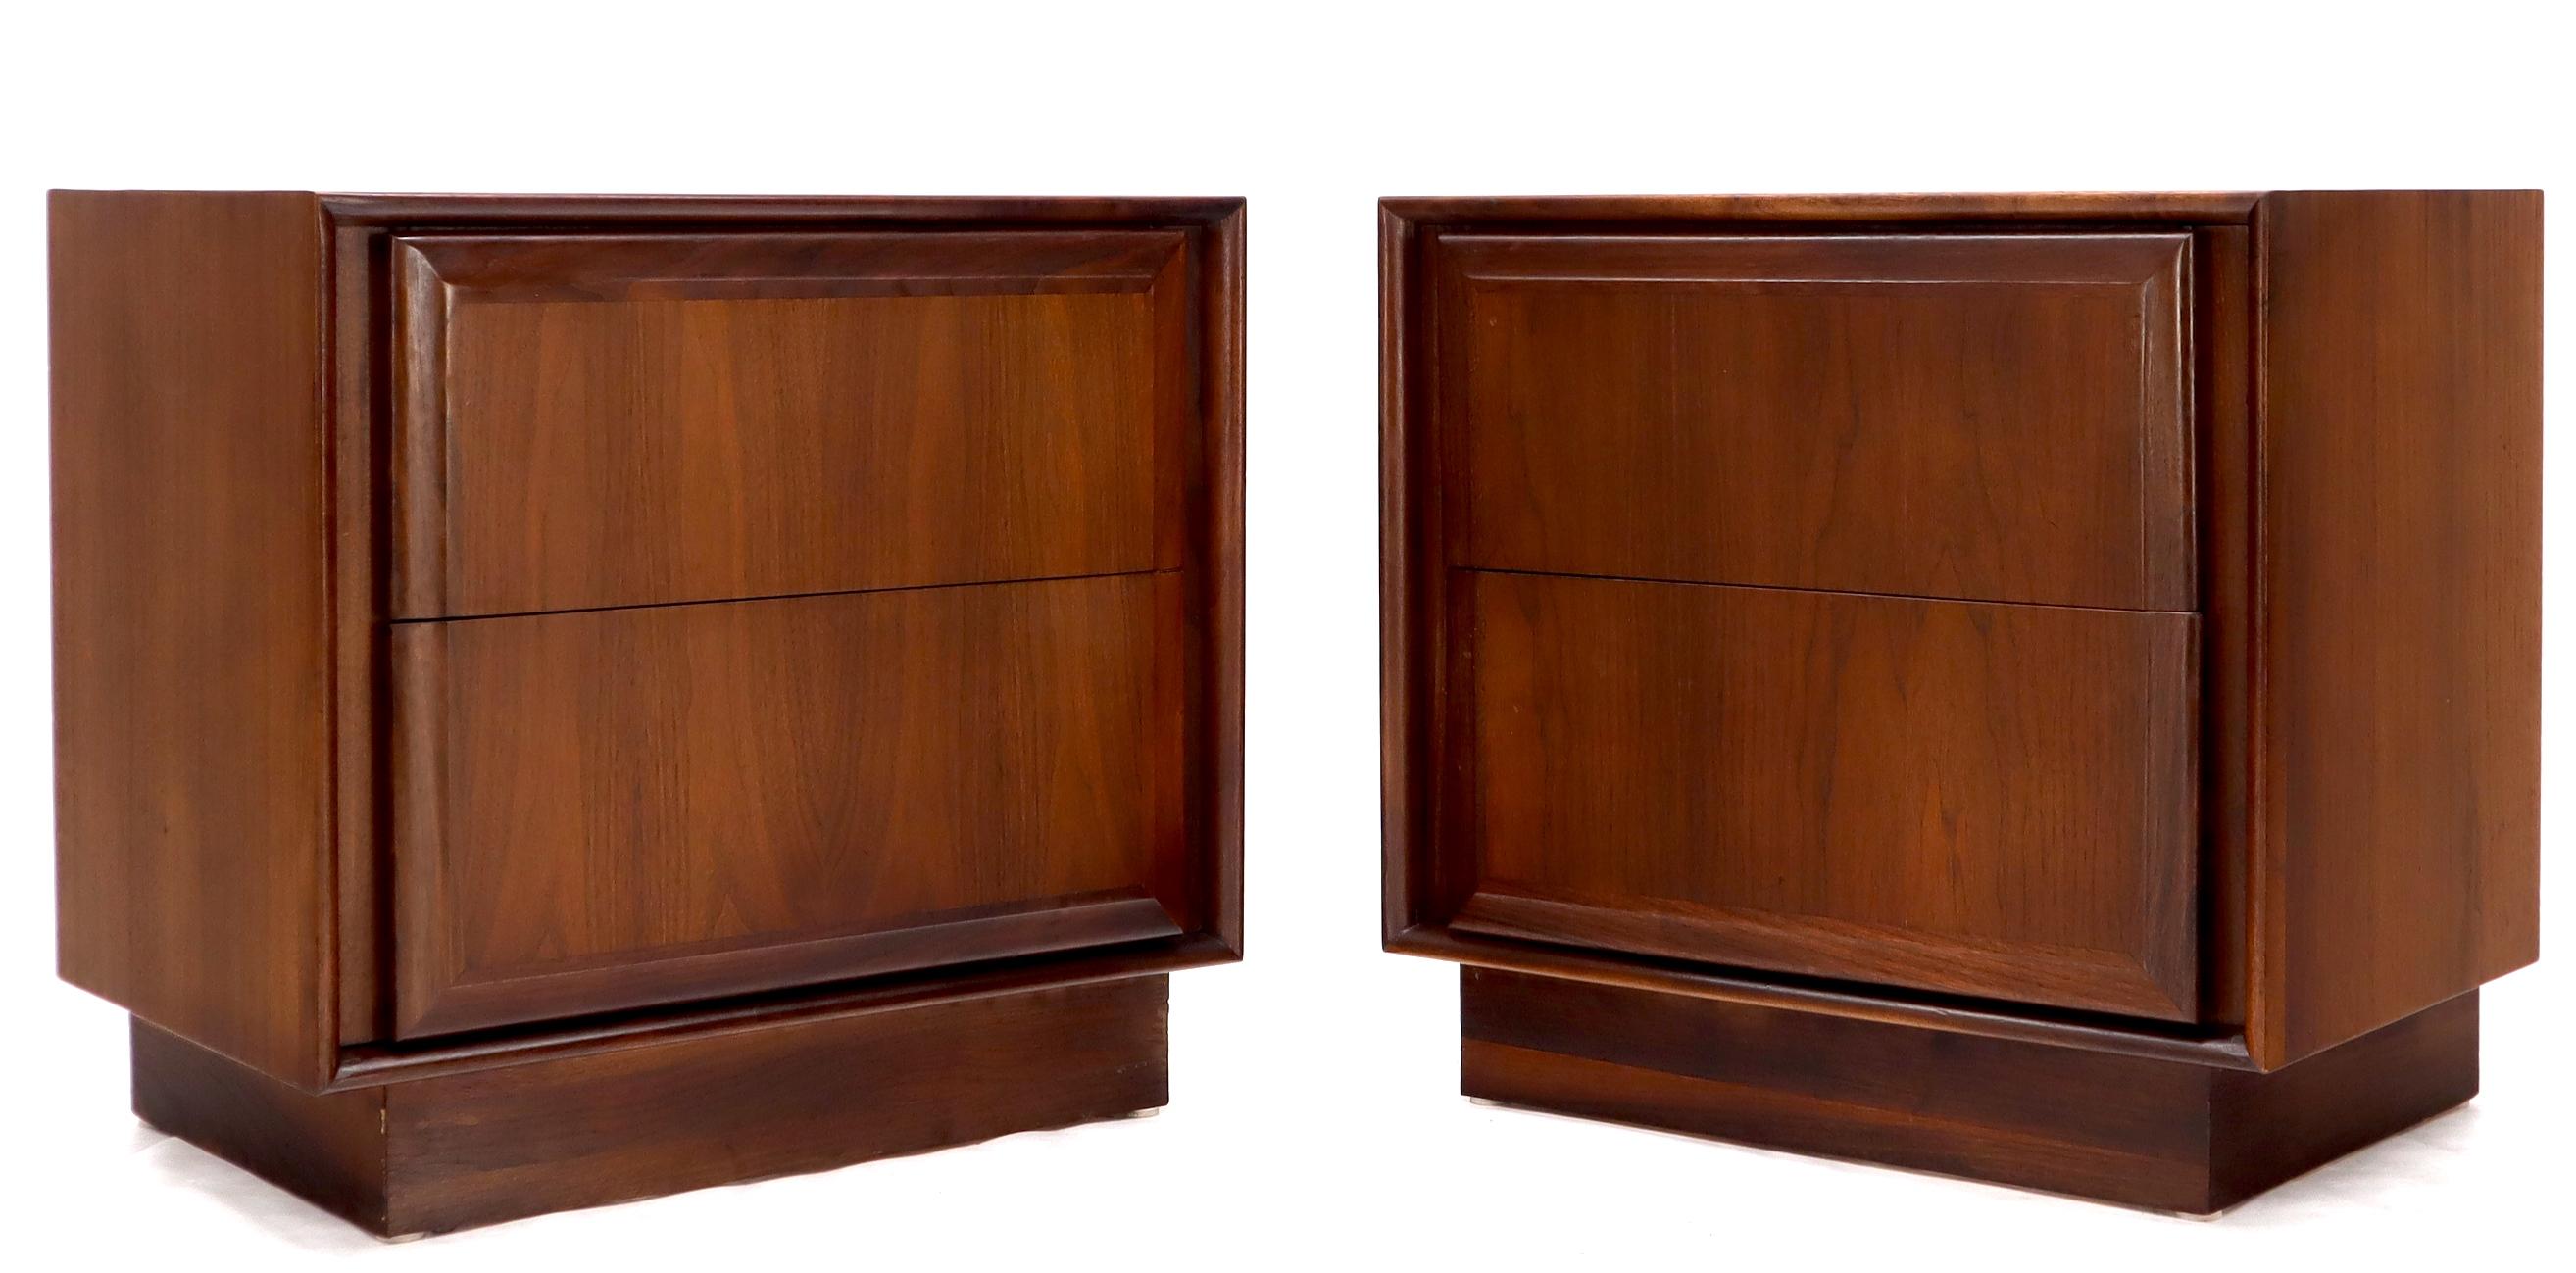 Pair of high quality Mid-Century Modern oiled walnut cube shape end tables or nightstands.